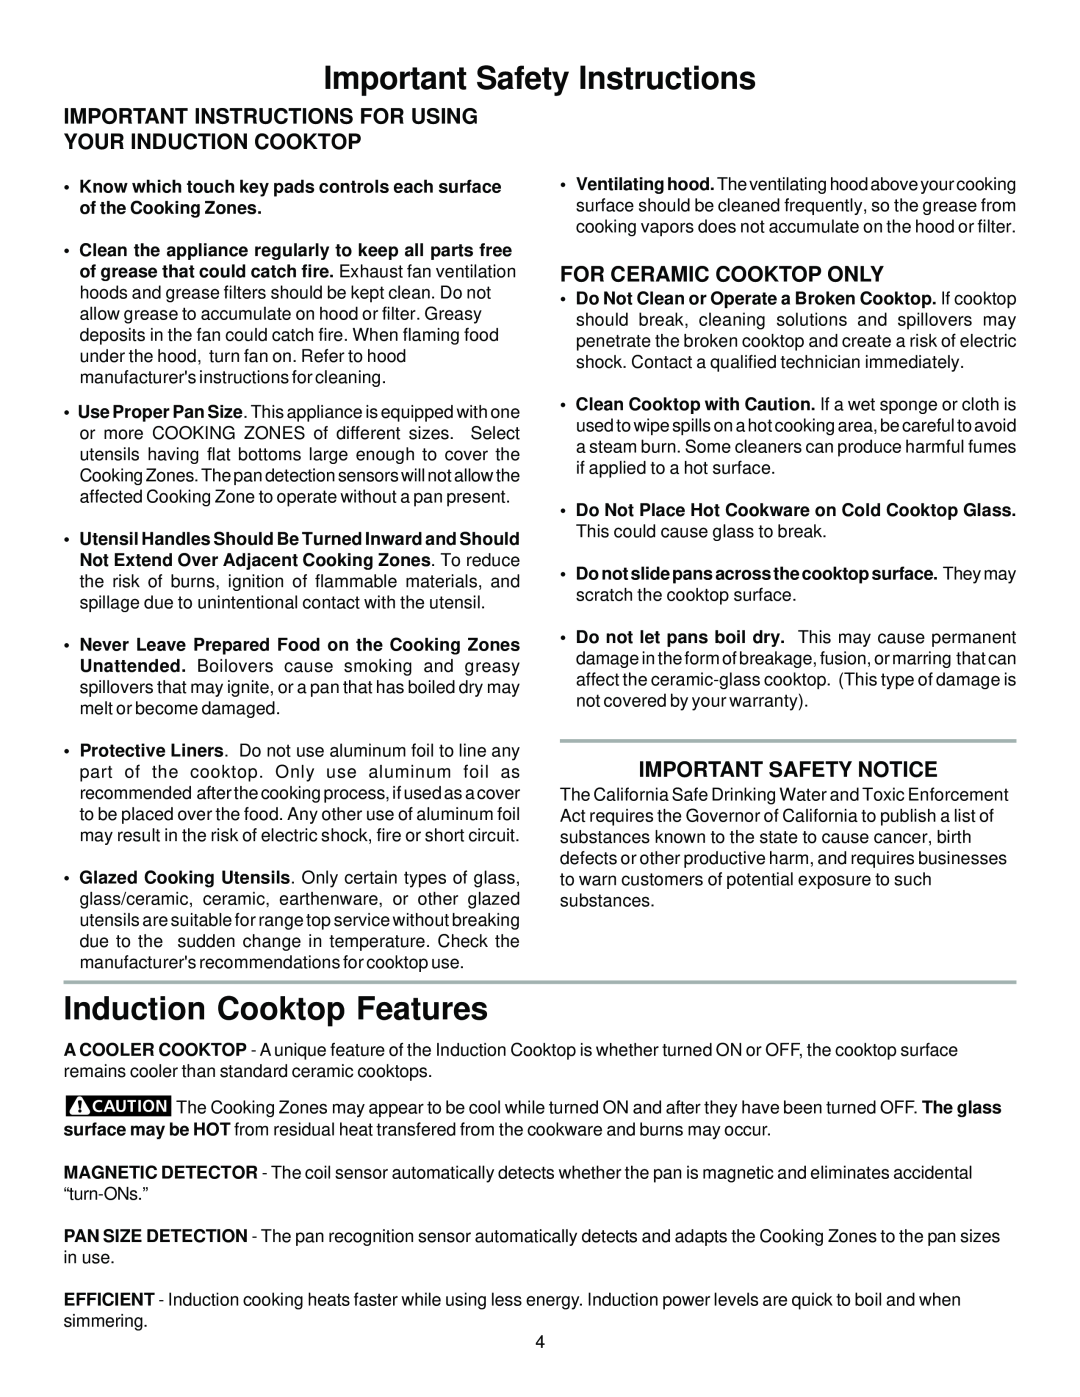 Sears 790.428 Induction Cooktop Features, Important Safety Instructions, For Ceramic Cooktop Only, Important Safety Notice 